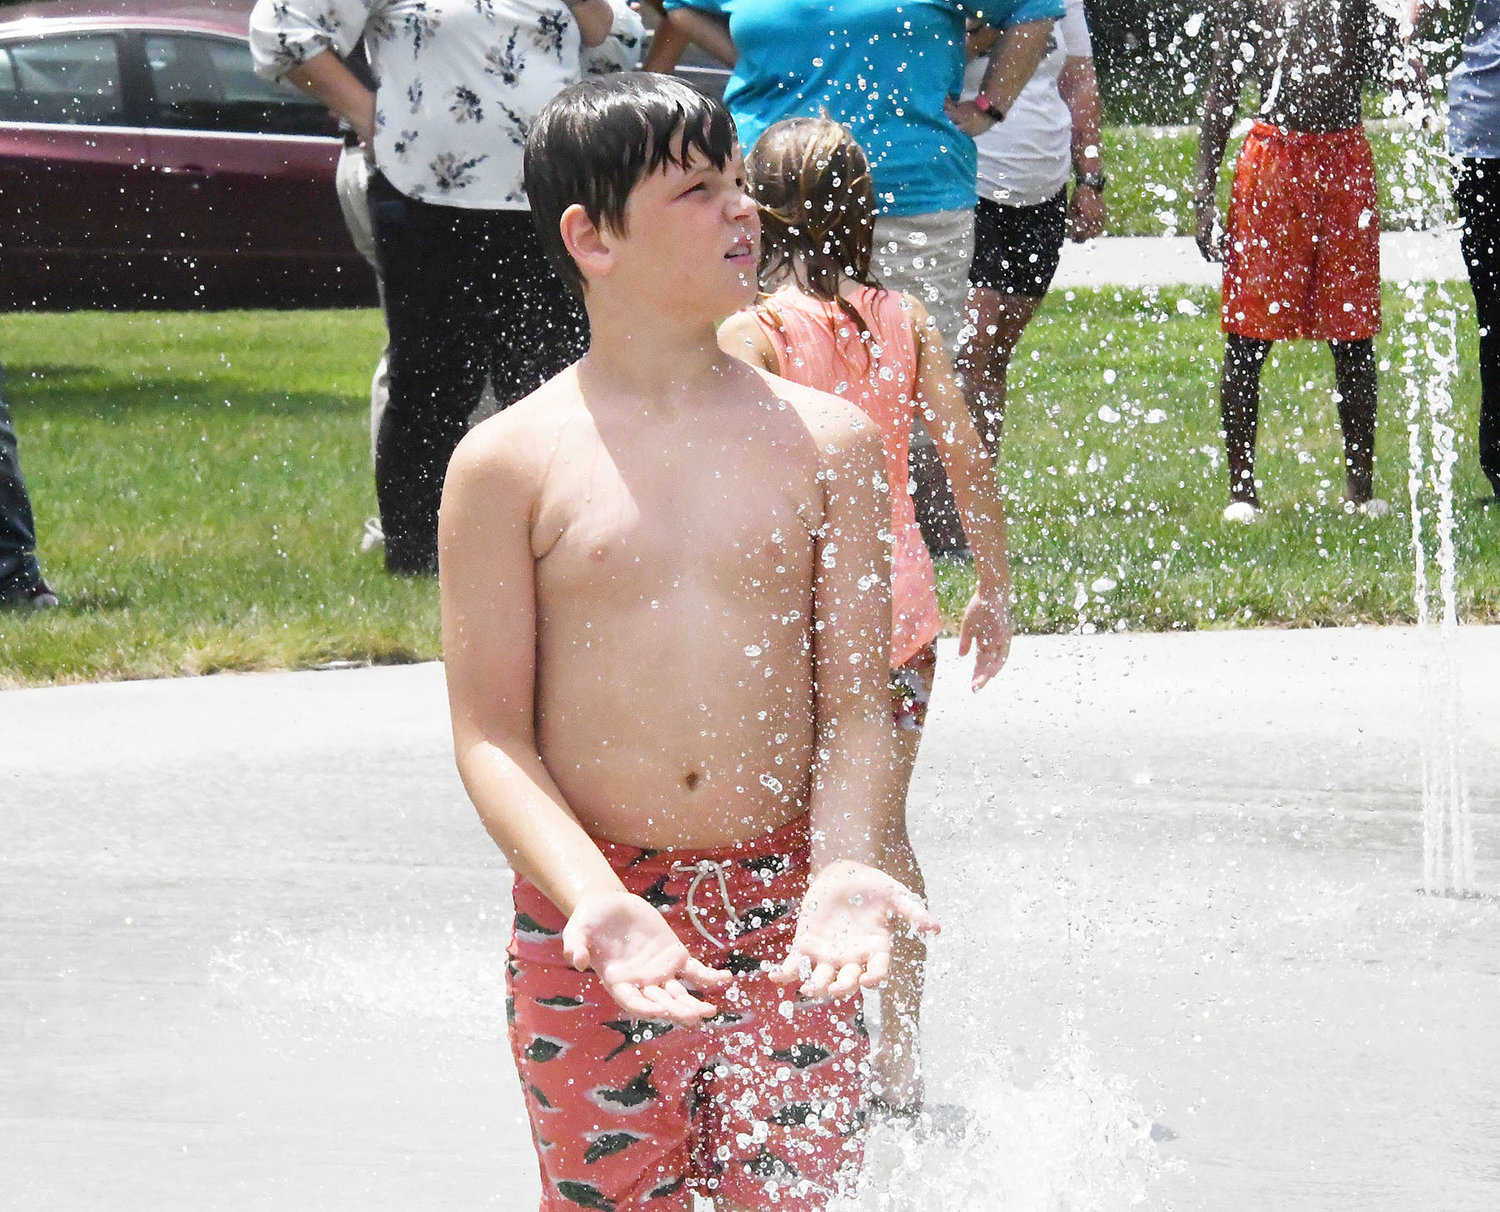 A youngster enjoys one the splashing ground features at Tannehill Park on Friday, July 8.